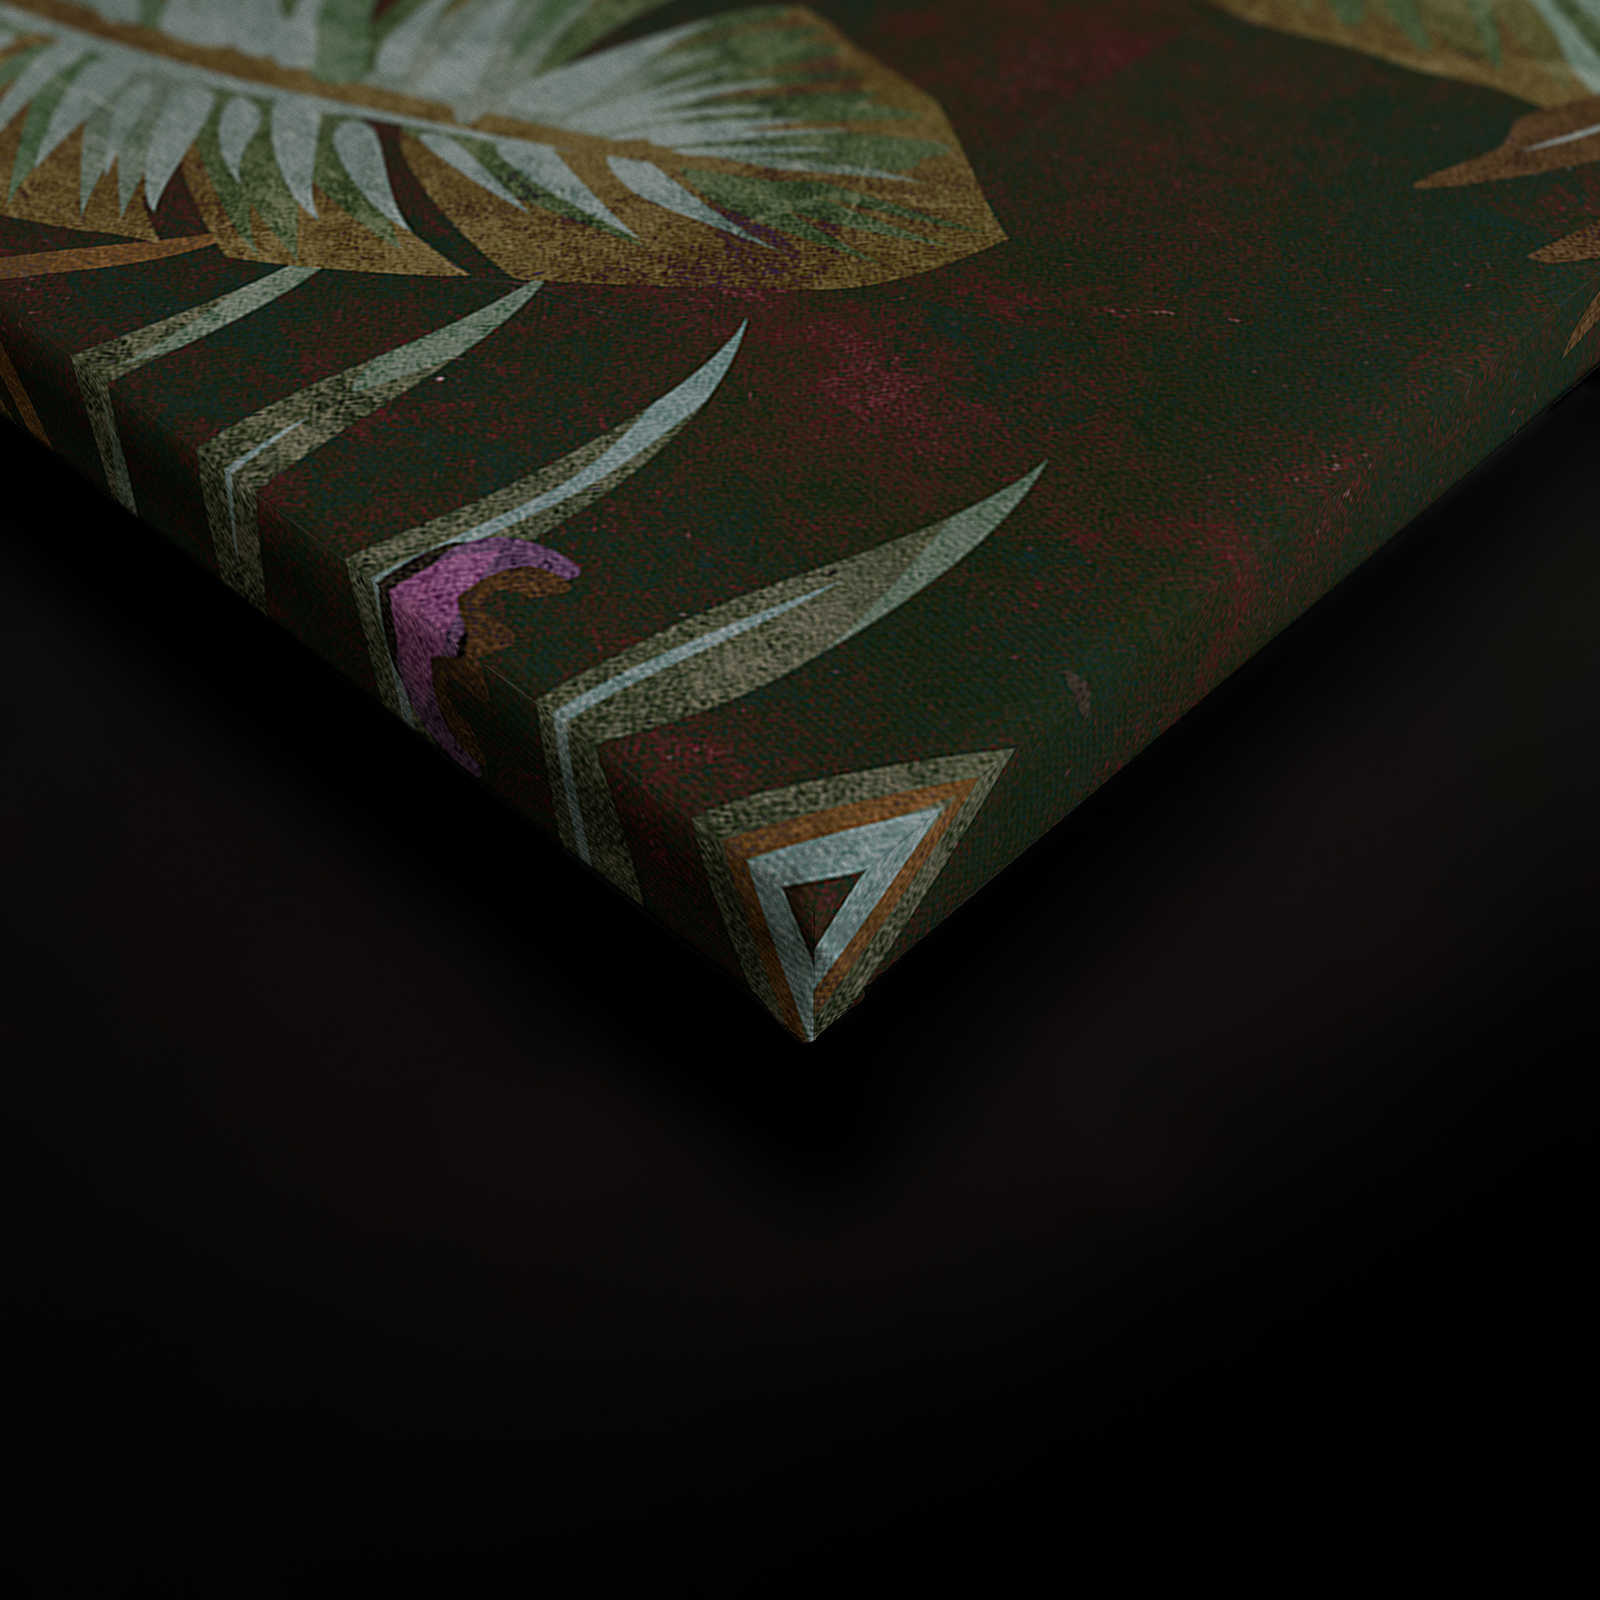             Tropicana 1 - Jungle Canvas Painting with Banana Leaves & Ferns - 1.20 m x 0.80 m
        